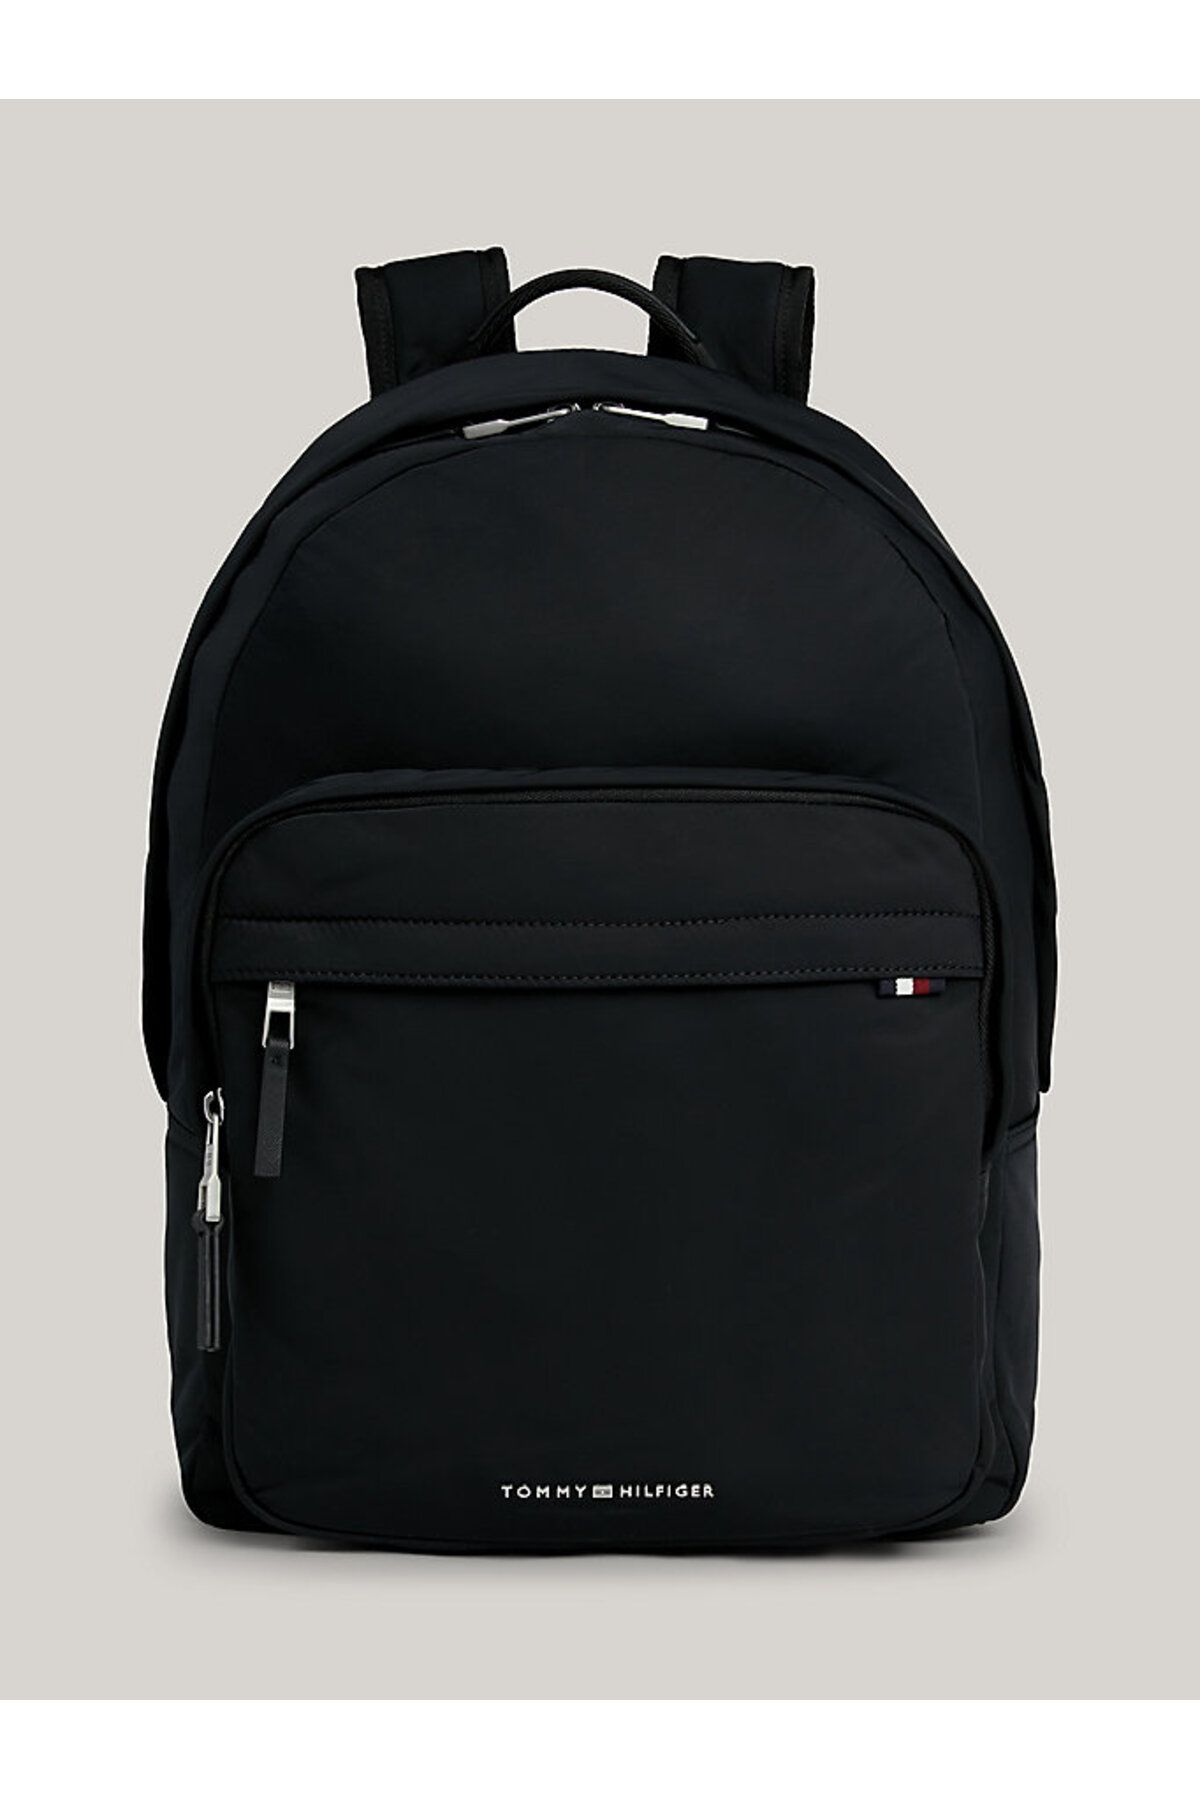 Tommy Hilfiger TH SIGNATURE BACKPACK